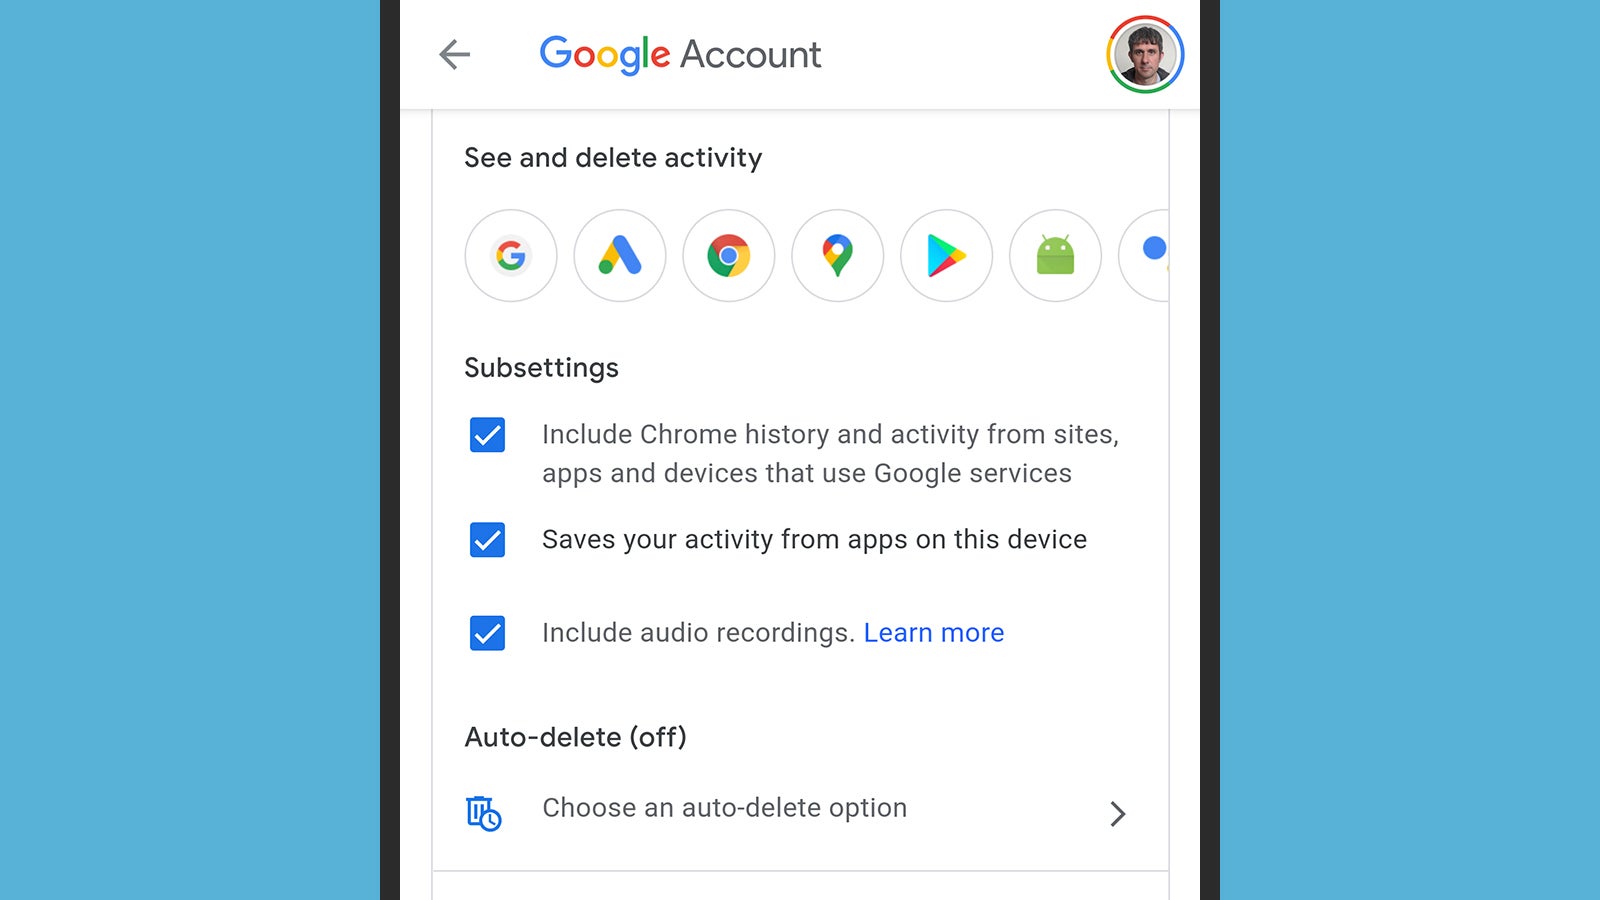 You can turn off audio recordings in your Google activity history. (Screenshot: Android)